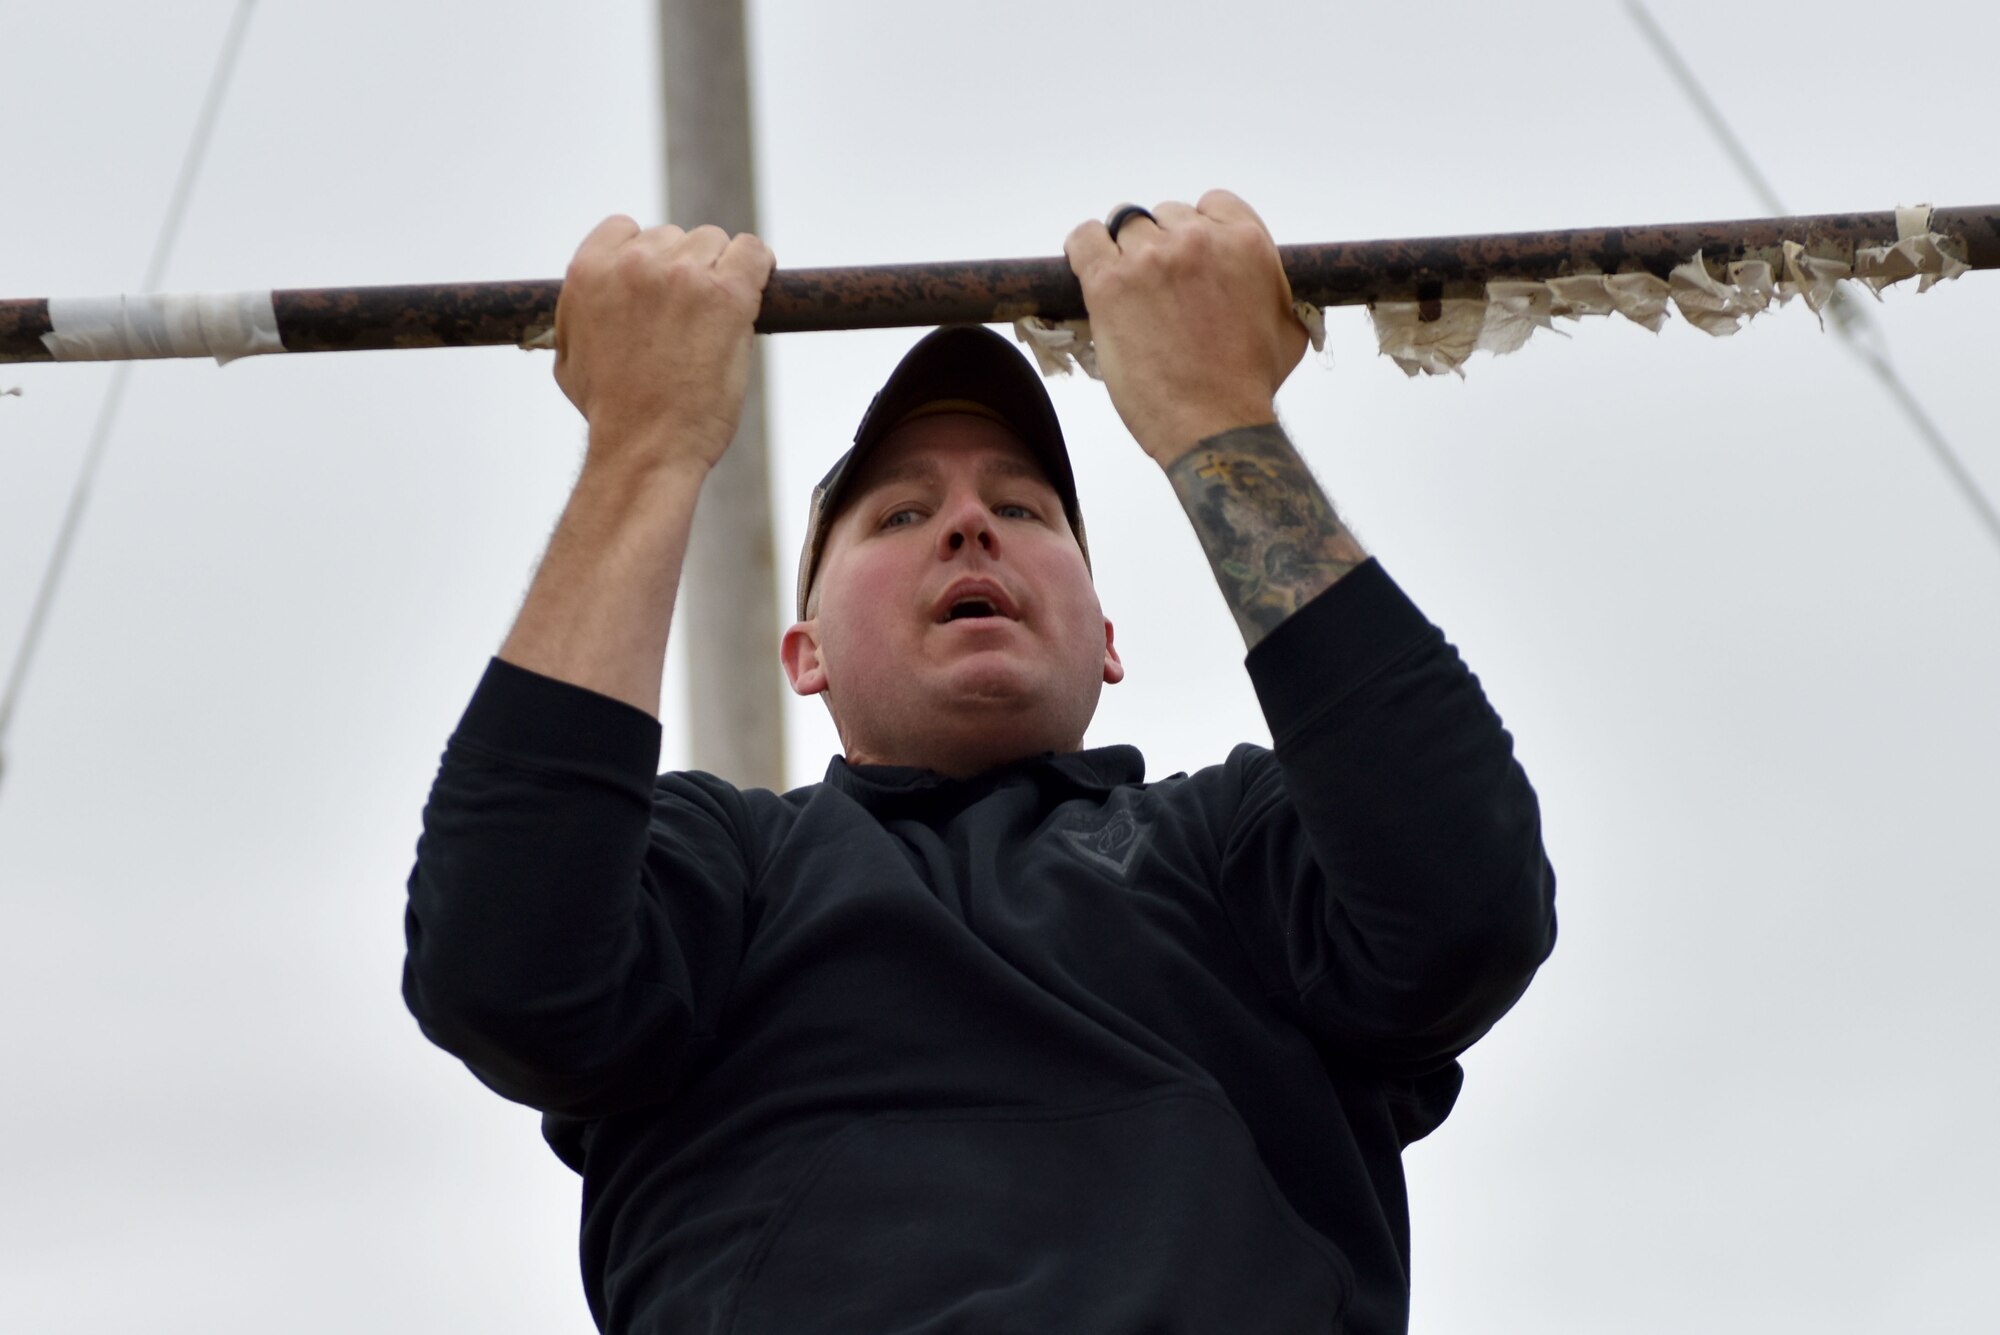 U.S. Air Force Master Sgt. Mark Karas, 17th Security Forces Squadron flight chief, completes a pull up during the National Police Week obstacle course on Goodfellow Air Force Base, Texas, May 12, 2021. The top five competitors of the event won a Police Week themed patch. (U.S. Air Force photo by Staff Sgt. Seraiah Wolf)